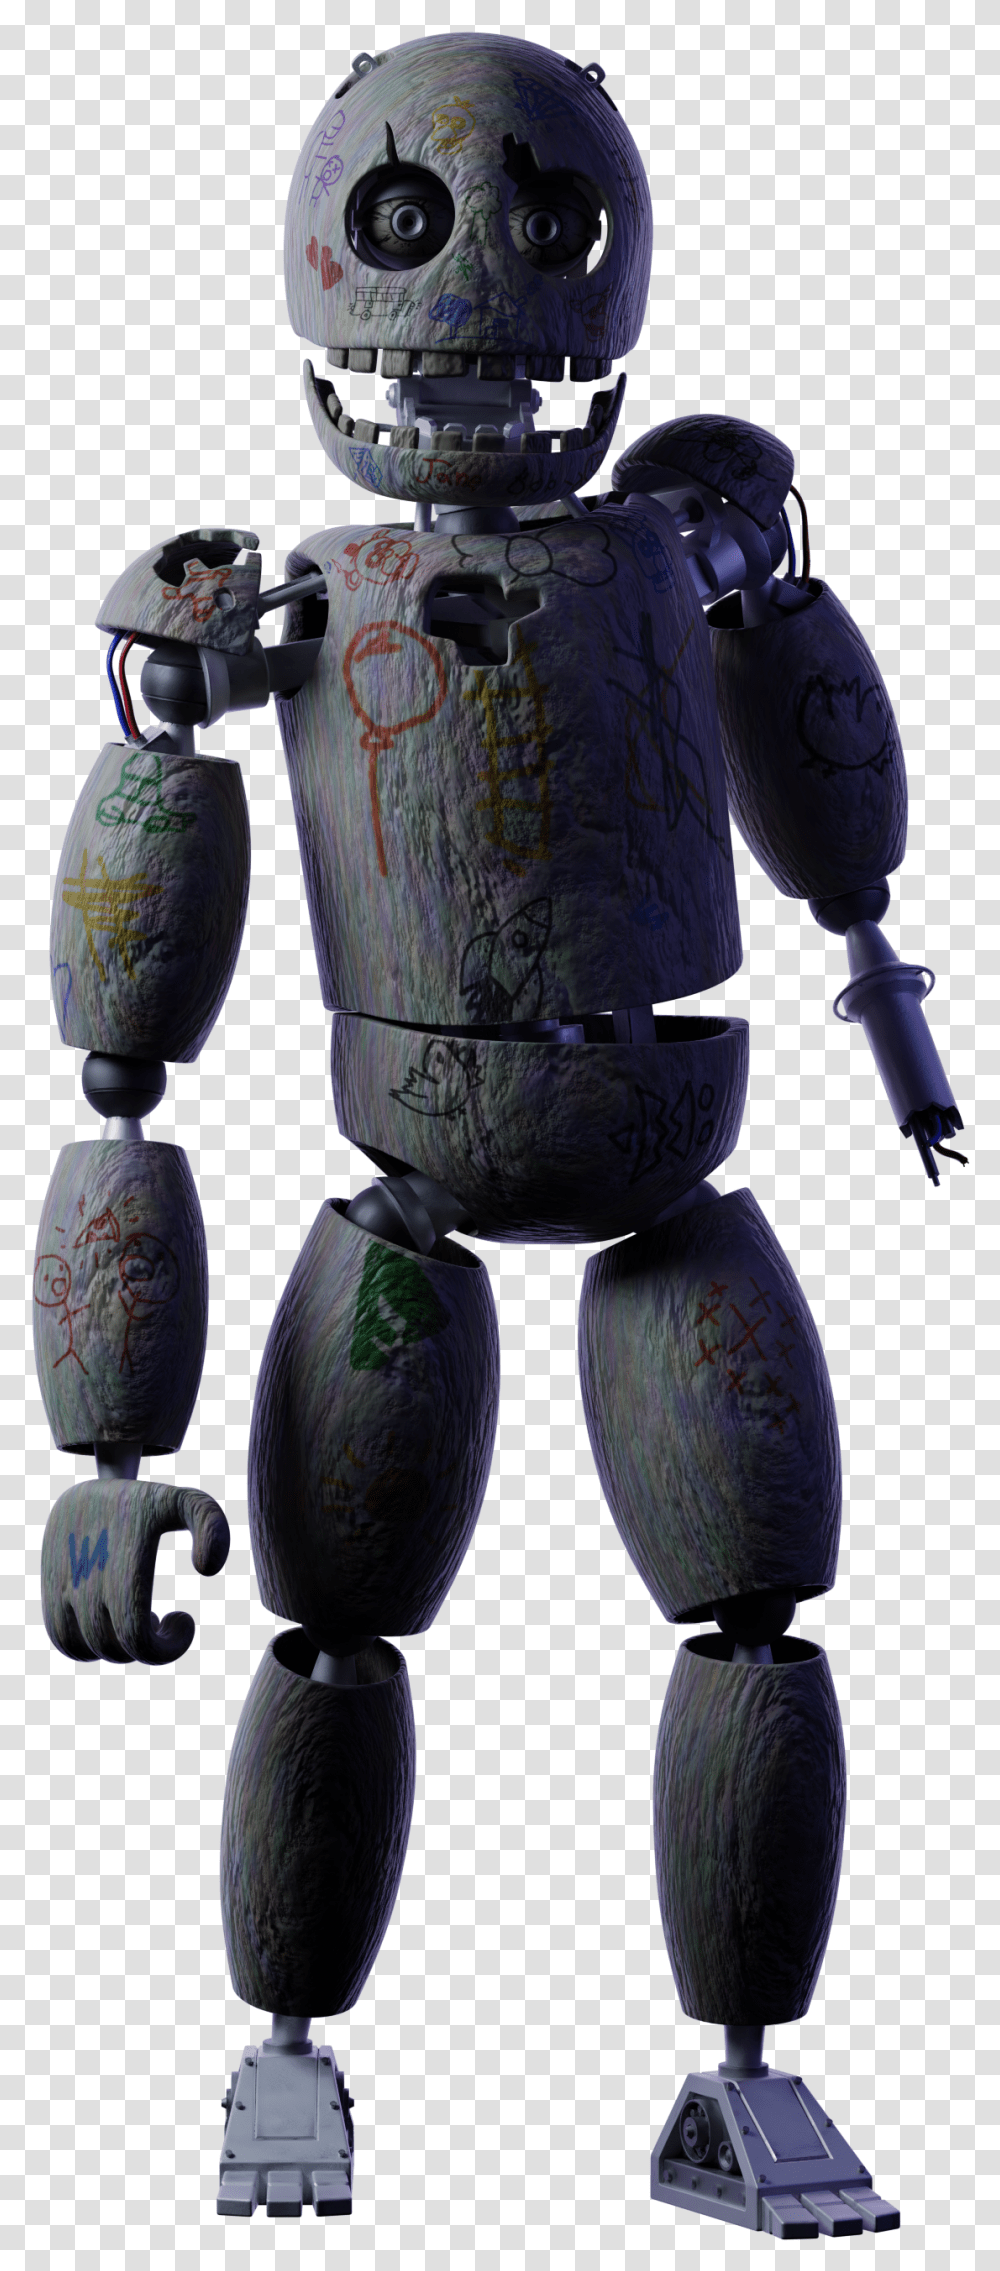 Five Nights At Candyamp Five Nights At Candy's Remastered Blank, Robot, Toy, Figurine Transparent Png